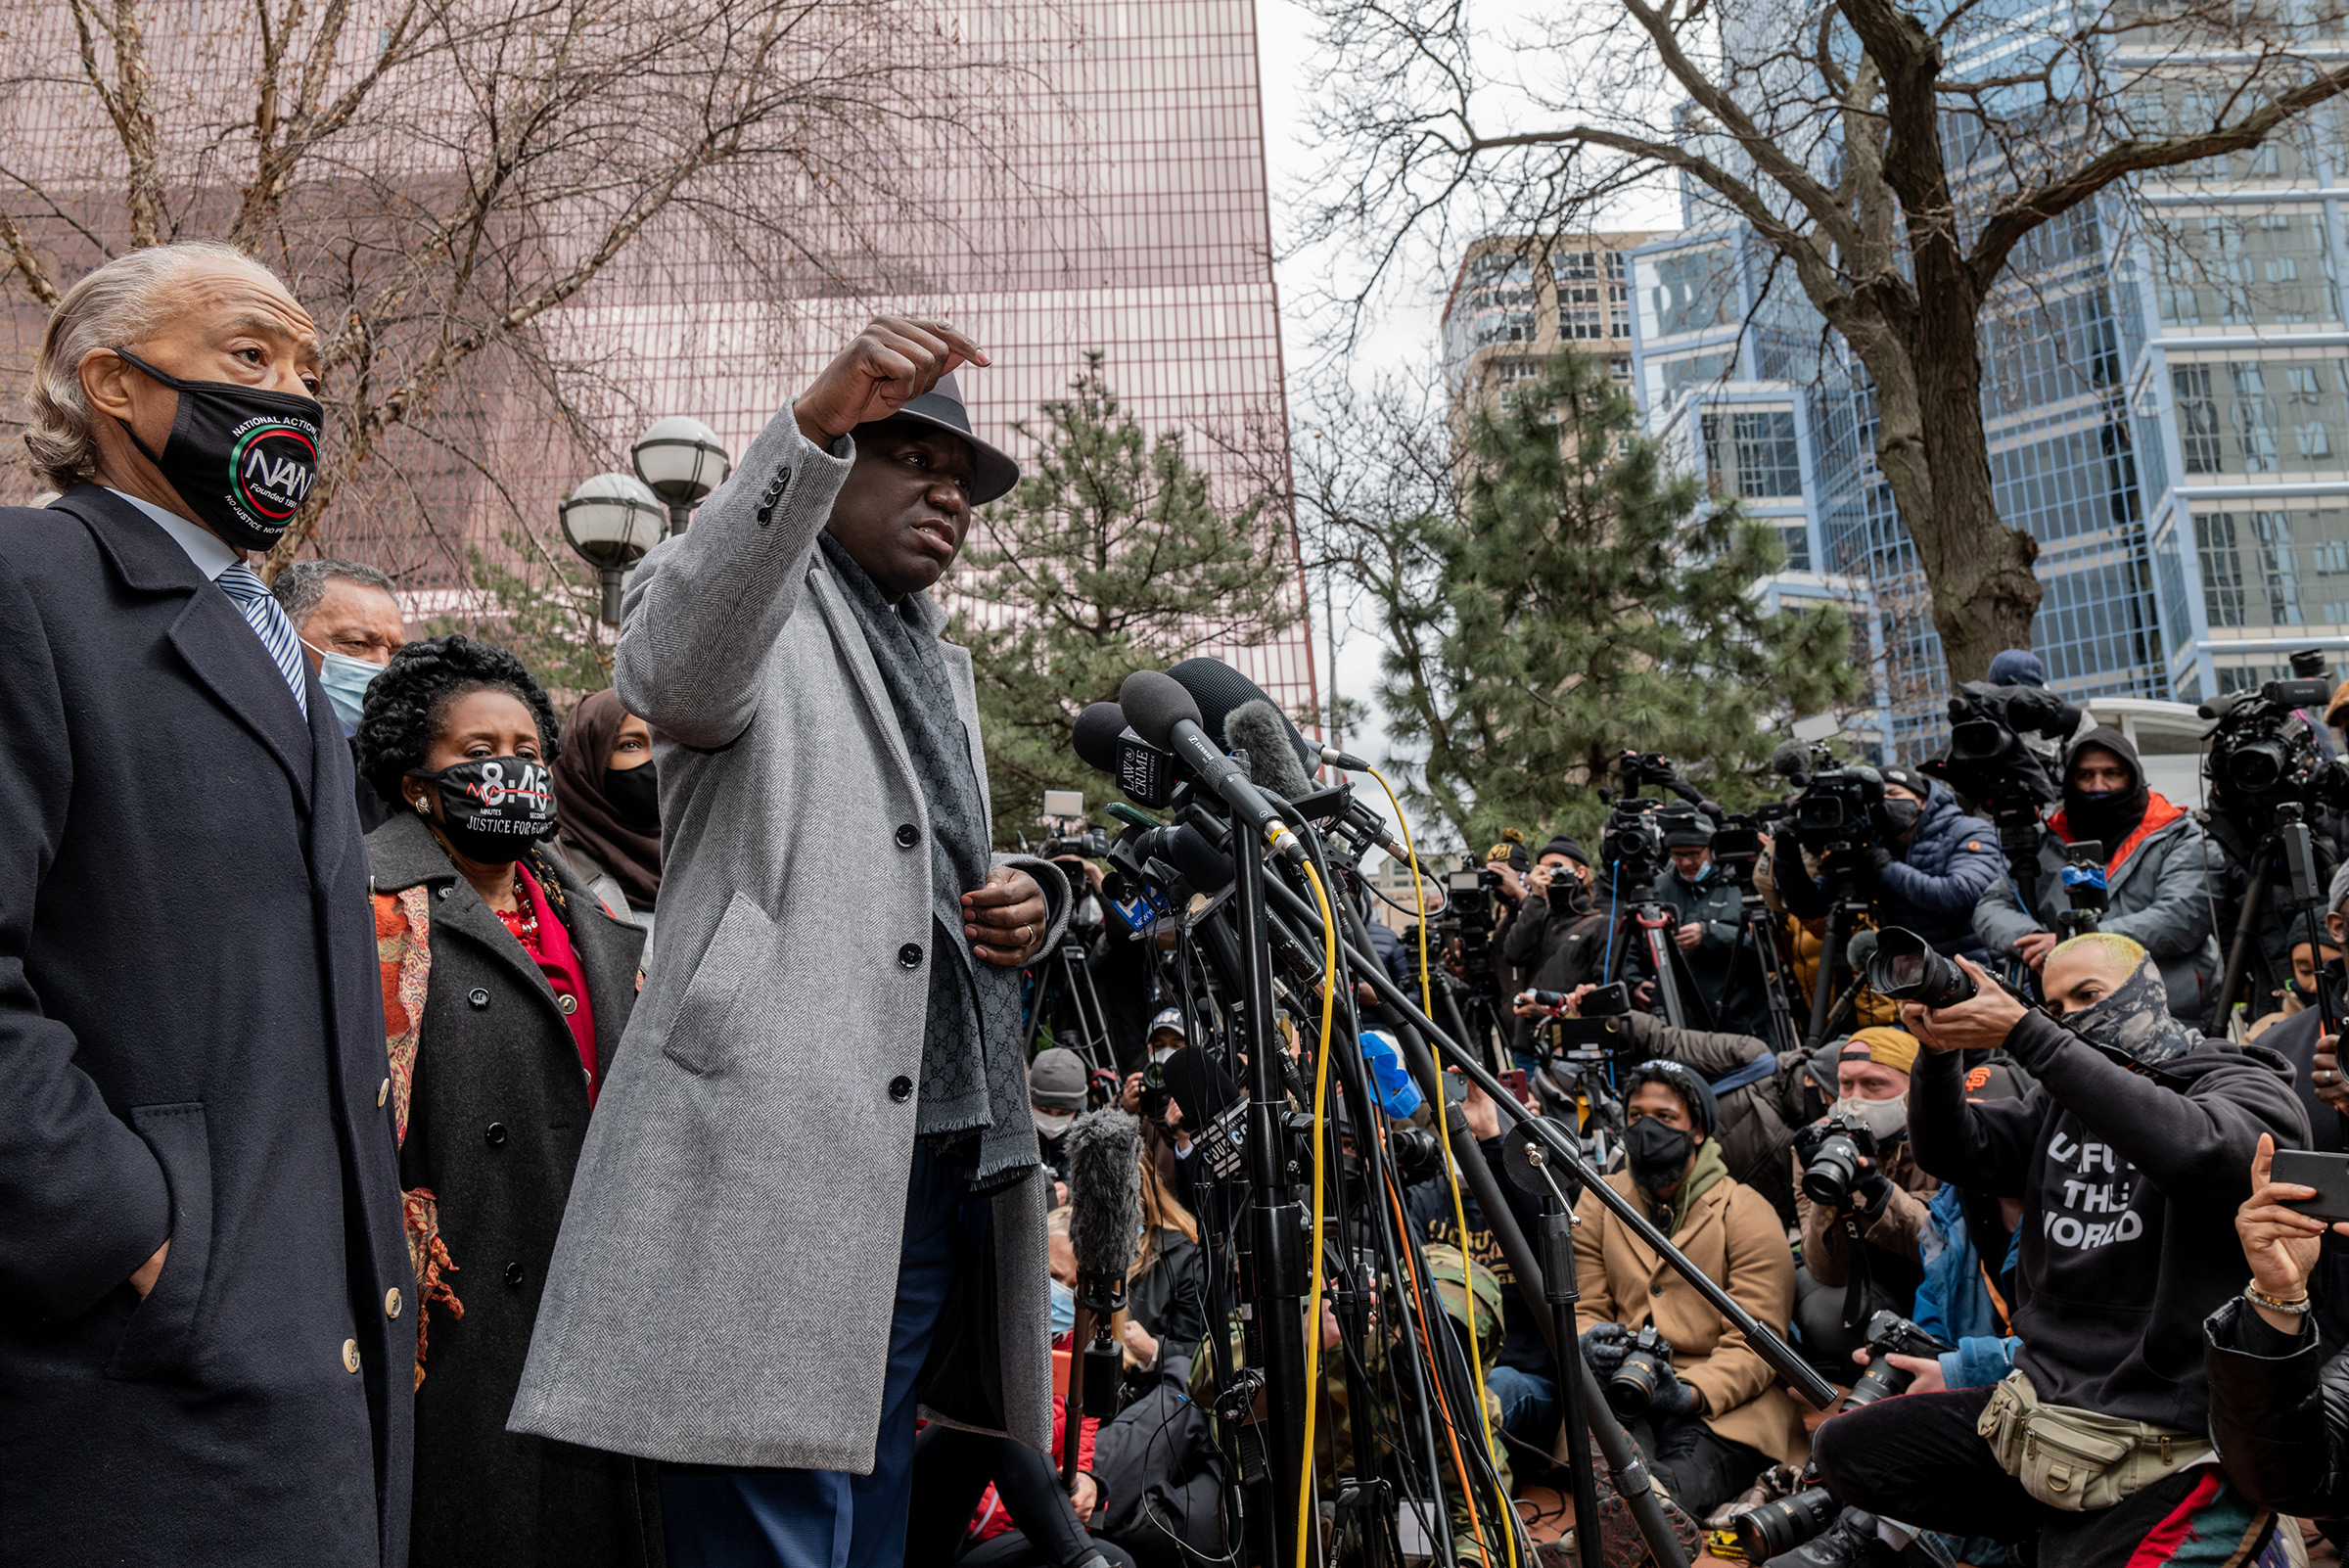 Attorney Ben Crump speaks before the Rev. Al Sharpton and leads a prayer outside of the courthouse during closing arguments in the Chauvin trial in Minneapolis on April 19. (Ruddy Roye for TIME)